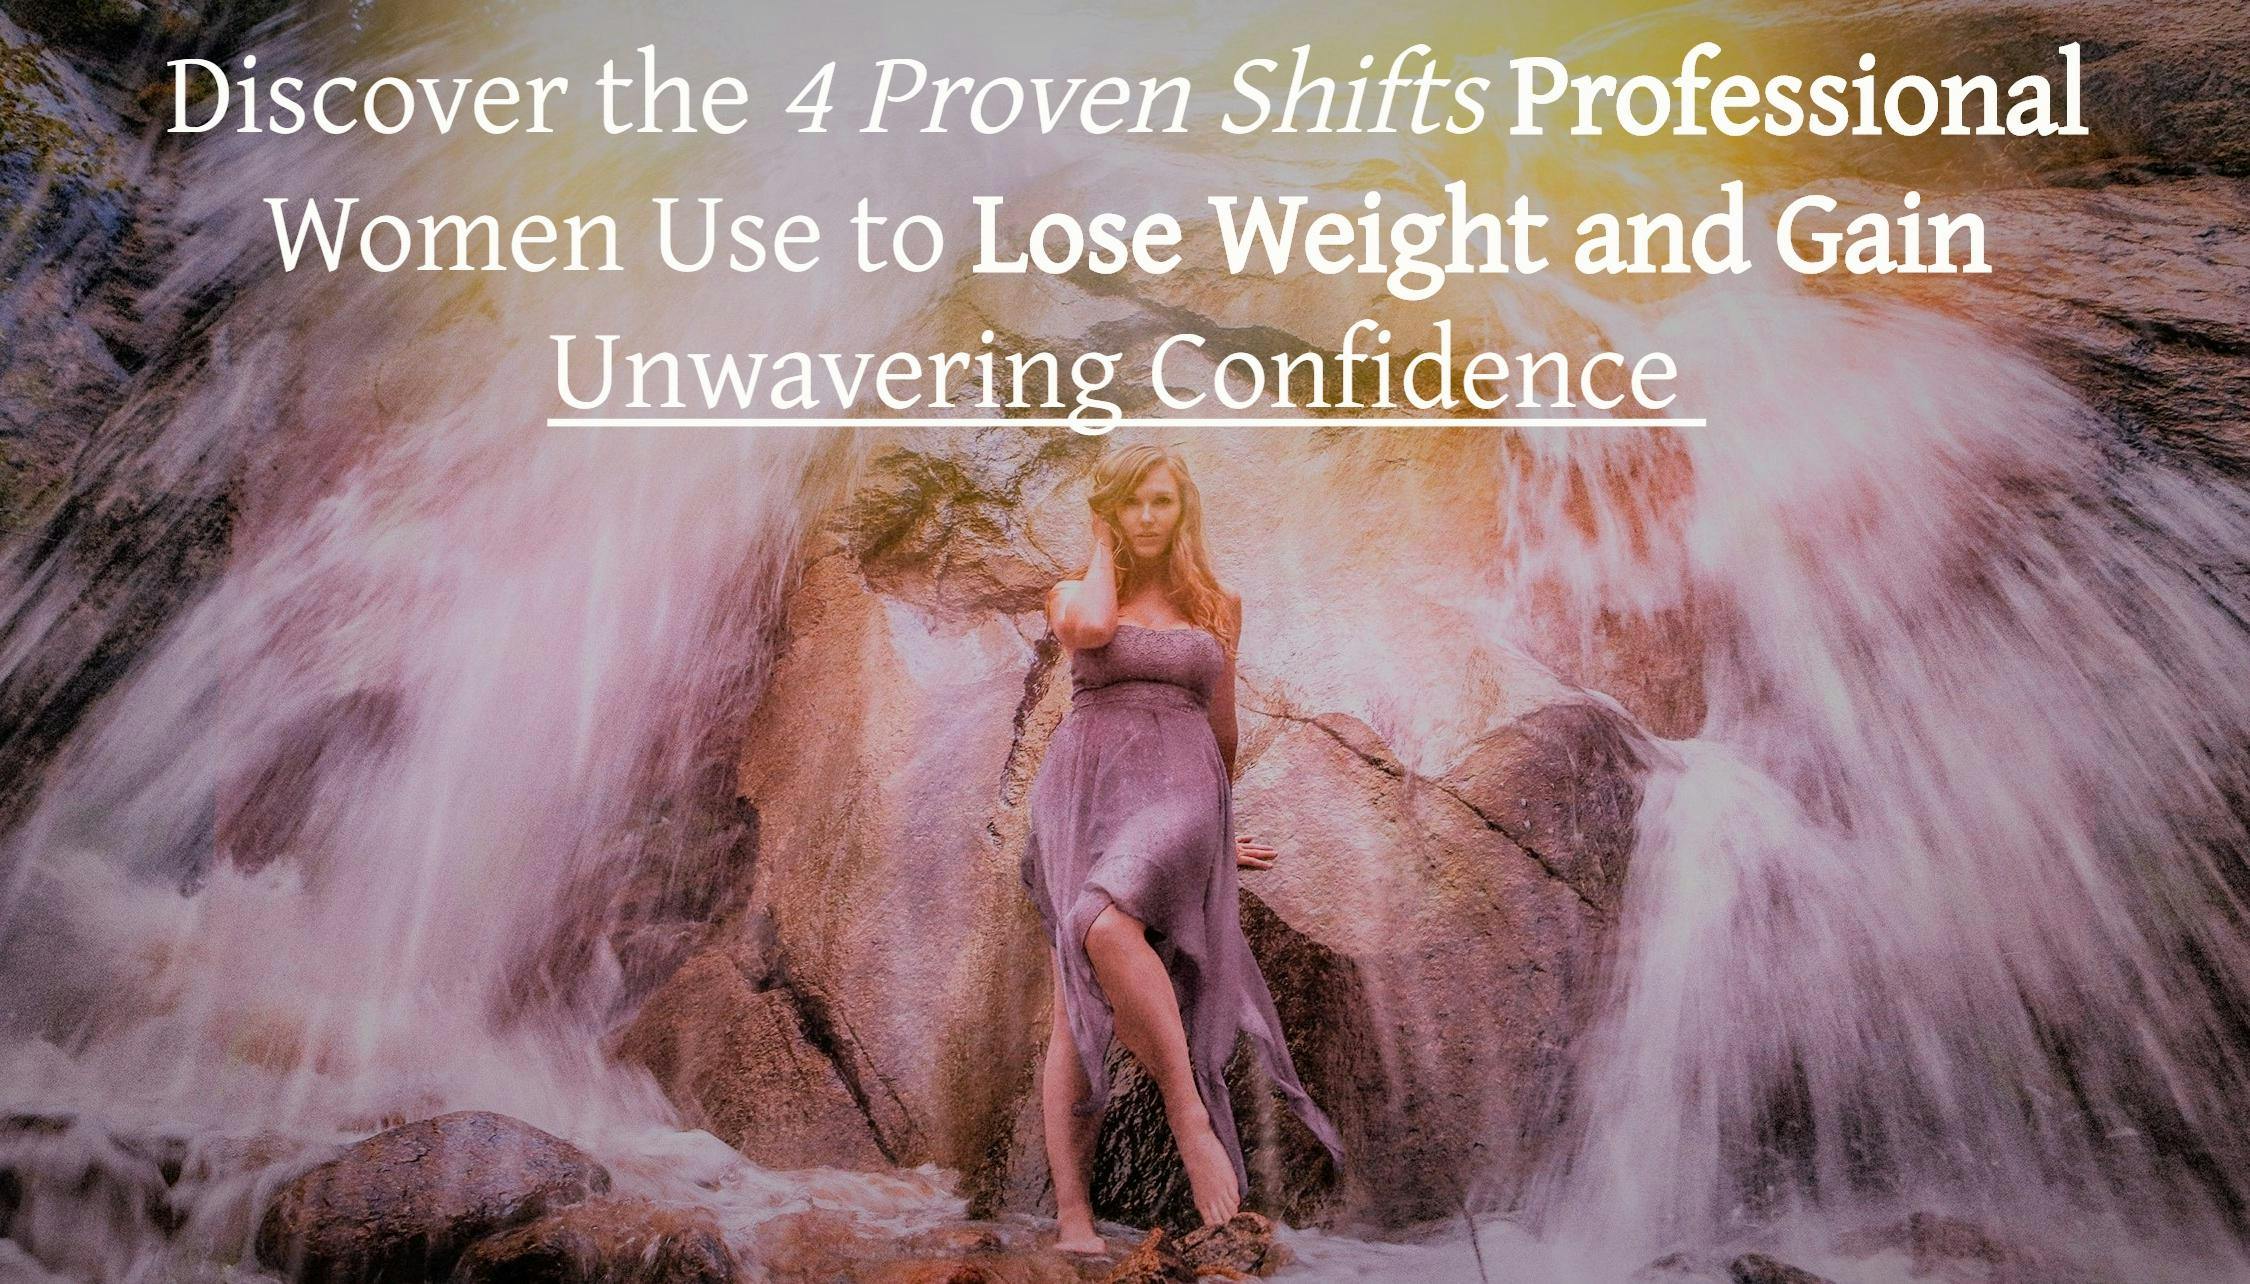 Discover the 4 Shifts Professional Women Use to Lose Weight & KEEP IT OFF